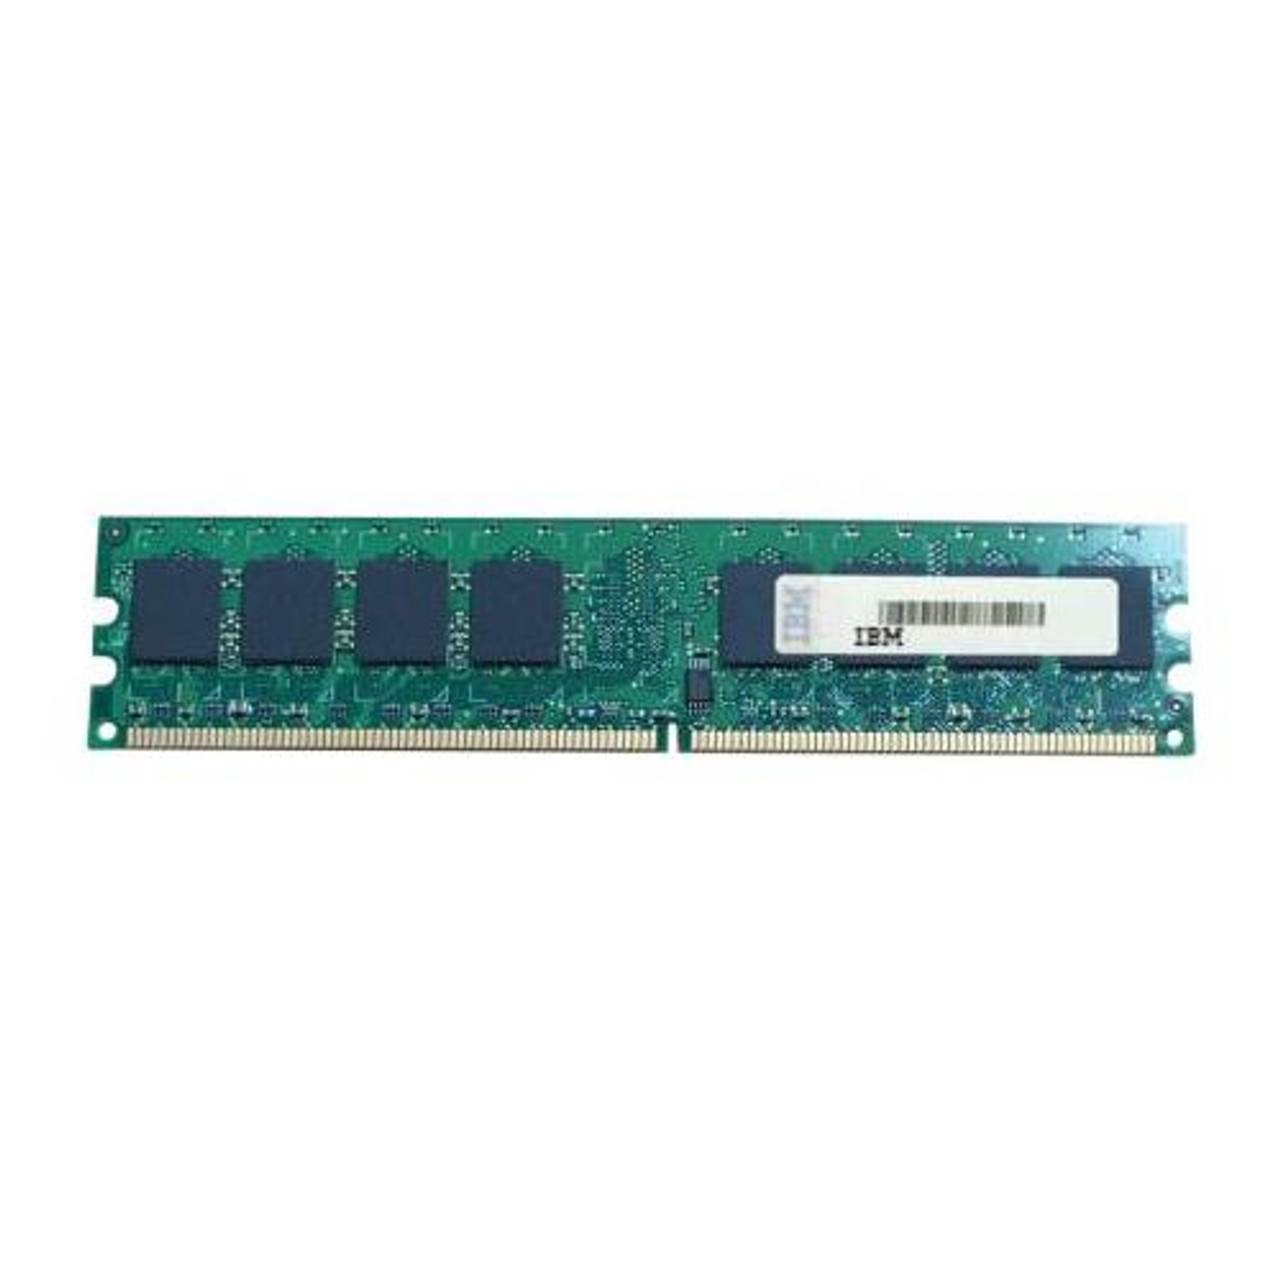 31P8856 IBM 512MB PC2700 DDR-333MHz non-ECC Unbuffered CL2.5 184-Pin DIMM 2.5V Memory Module for ThinkCentre A51 S50